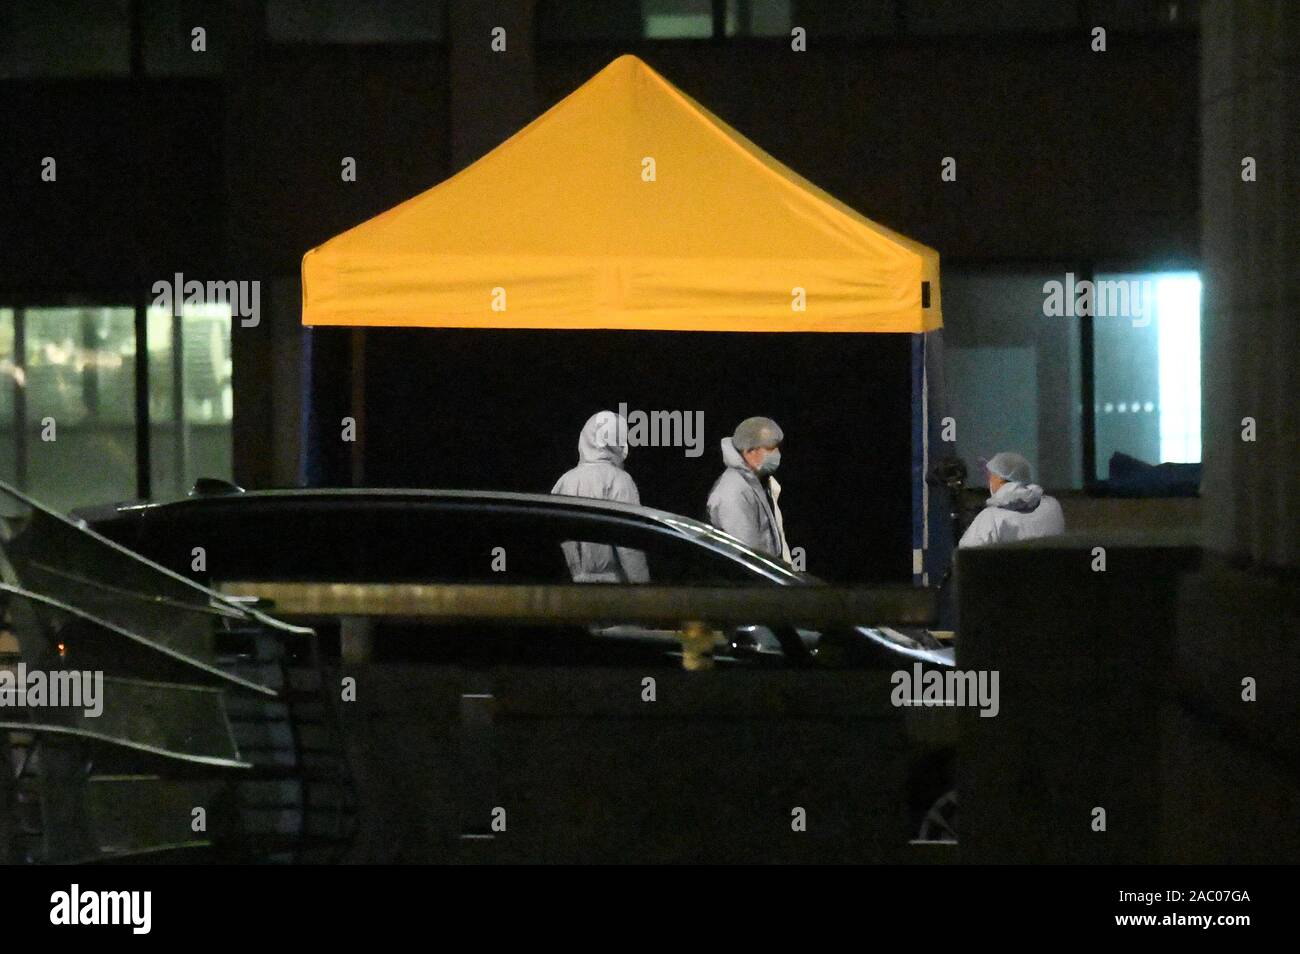 Forensic officers at the scene of an incident on London Bridge in central London after a terrorist wearing a fake suicide vest who went on a knife rampage was shot dead by police. Stock Photo